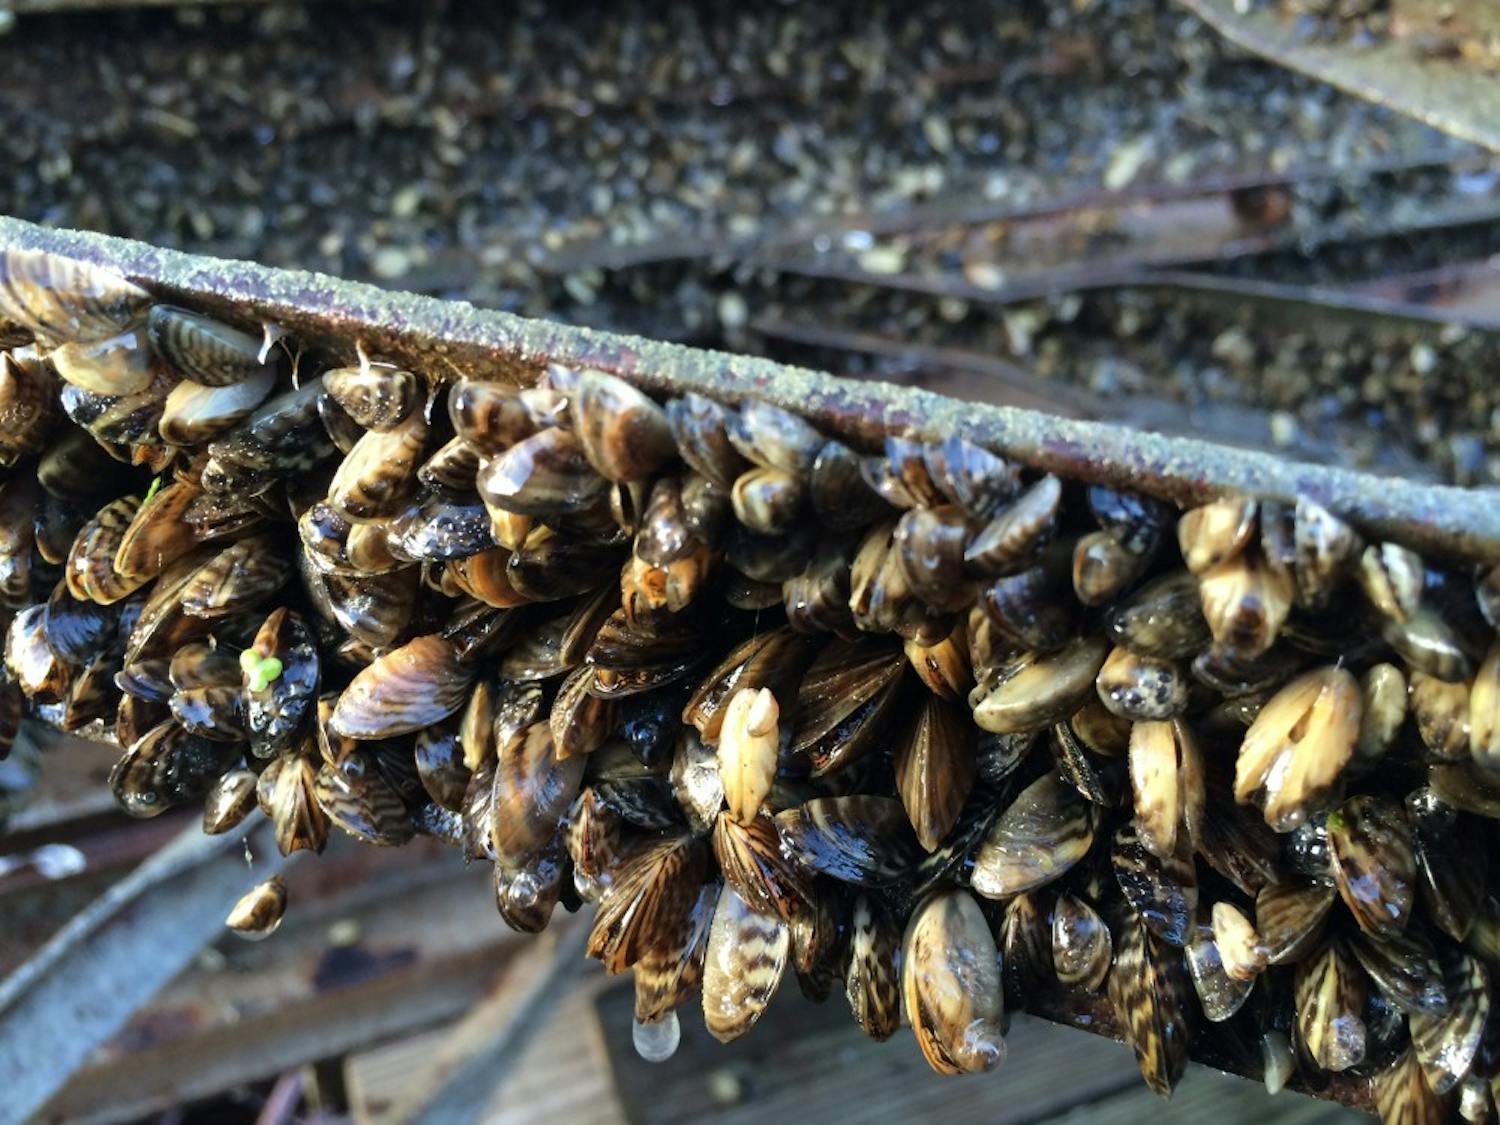 A section of the&nbsp;UW Hoofers pier, pulled from Lake Mendota&nbsp;in early November, was coated in zebra mussels, an invasive species found in the lake last fall.